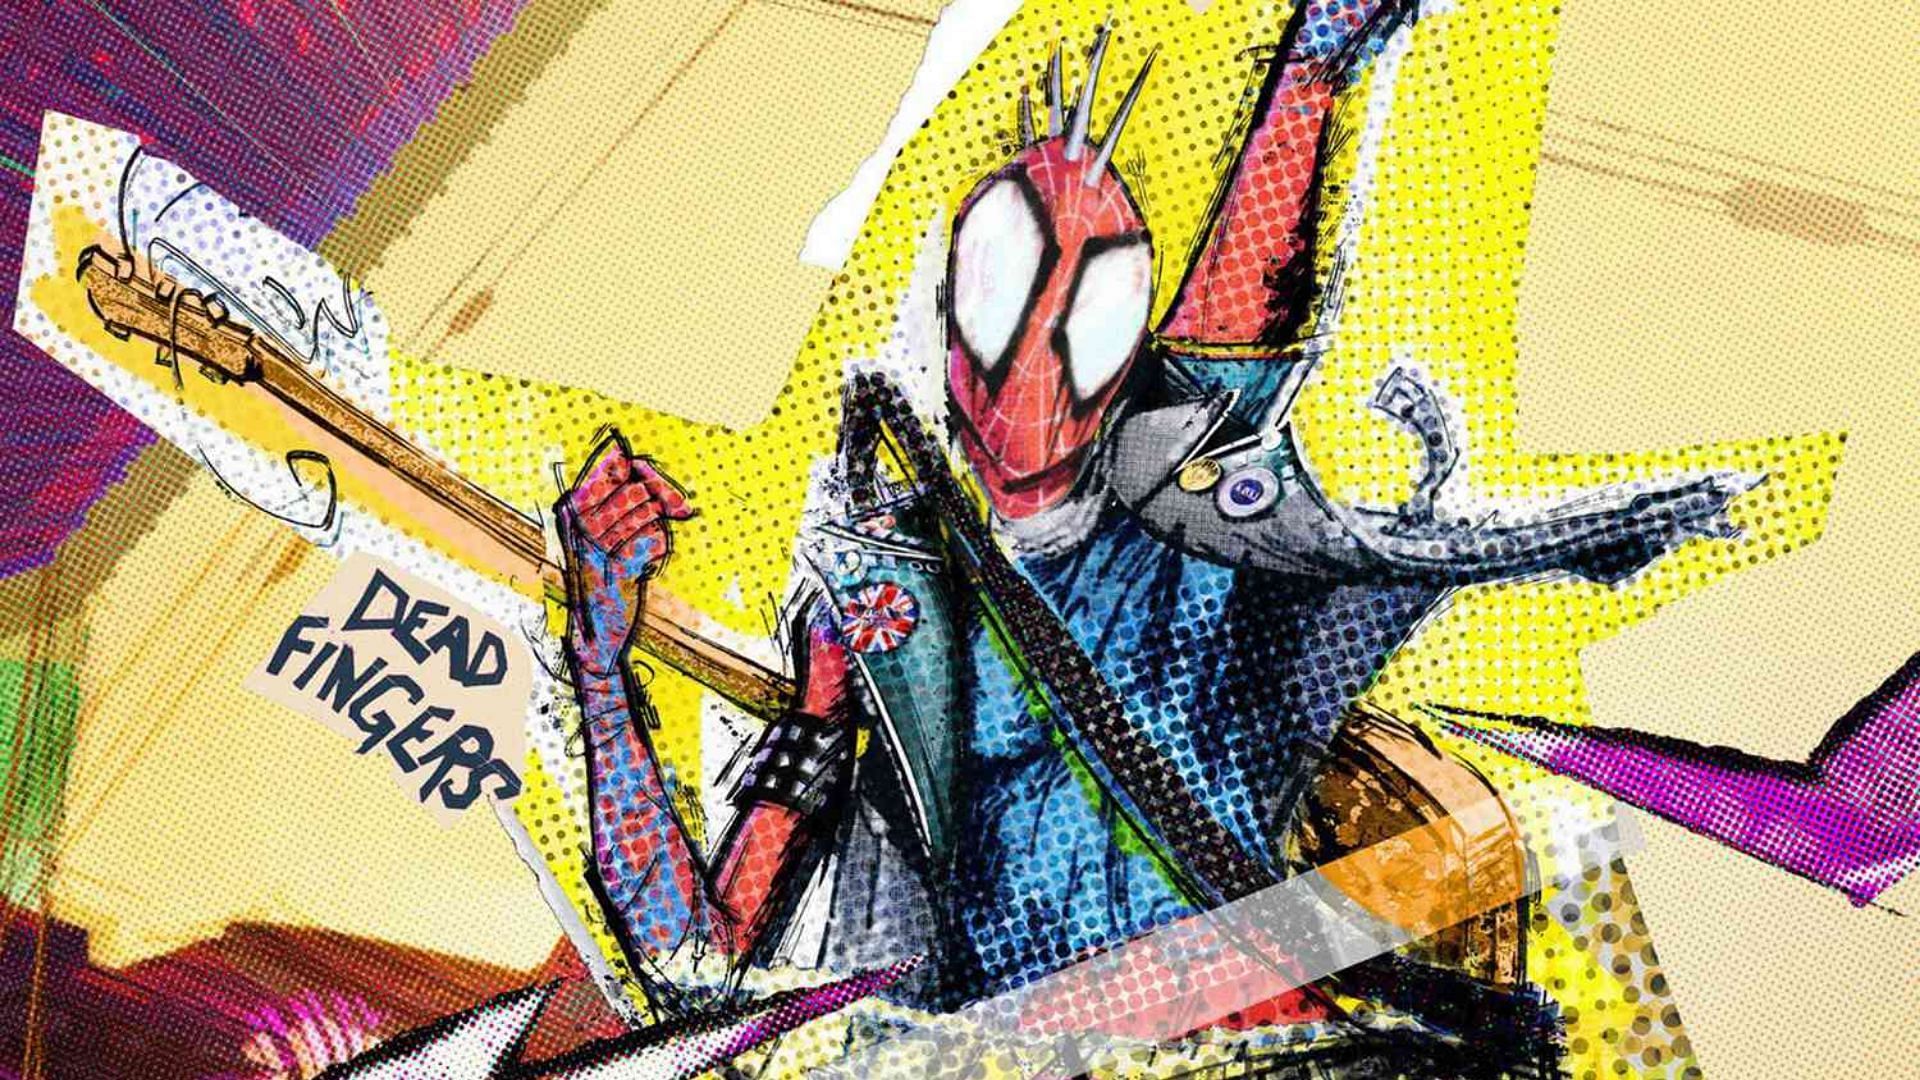 Spider-Punk (Image via Entertainment Weekly)